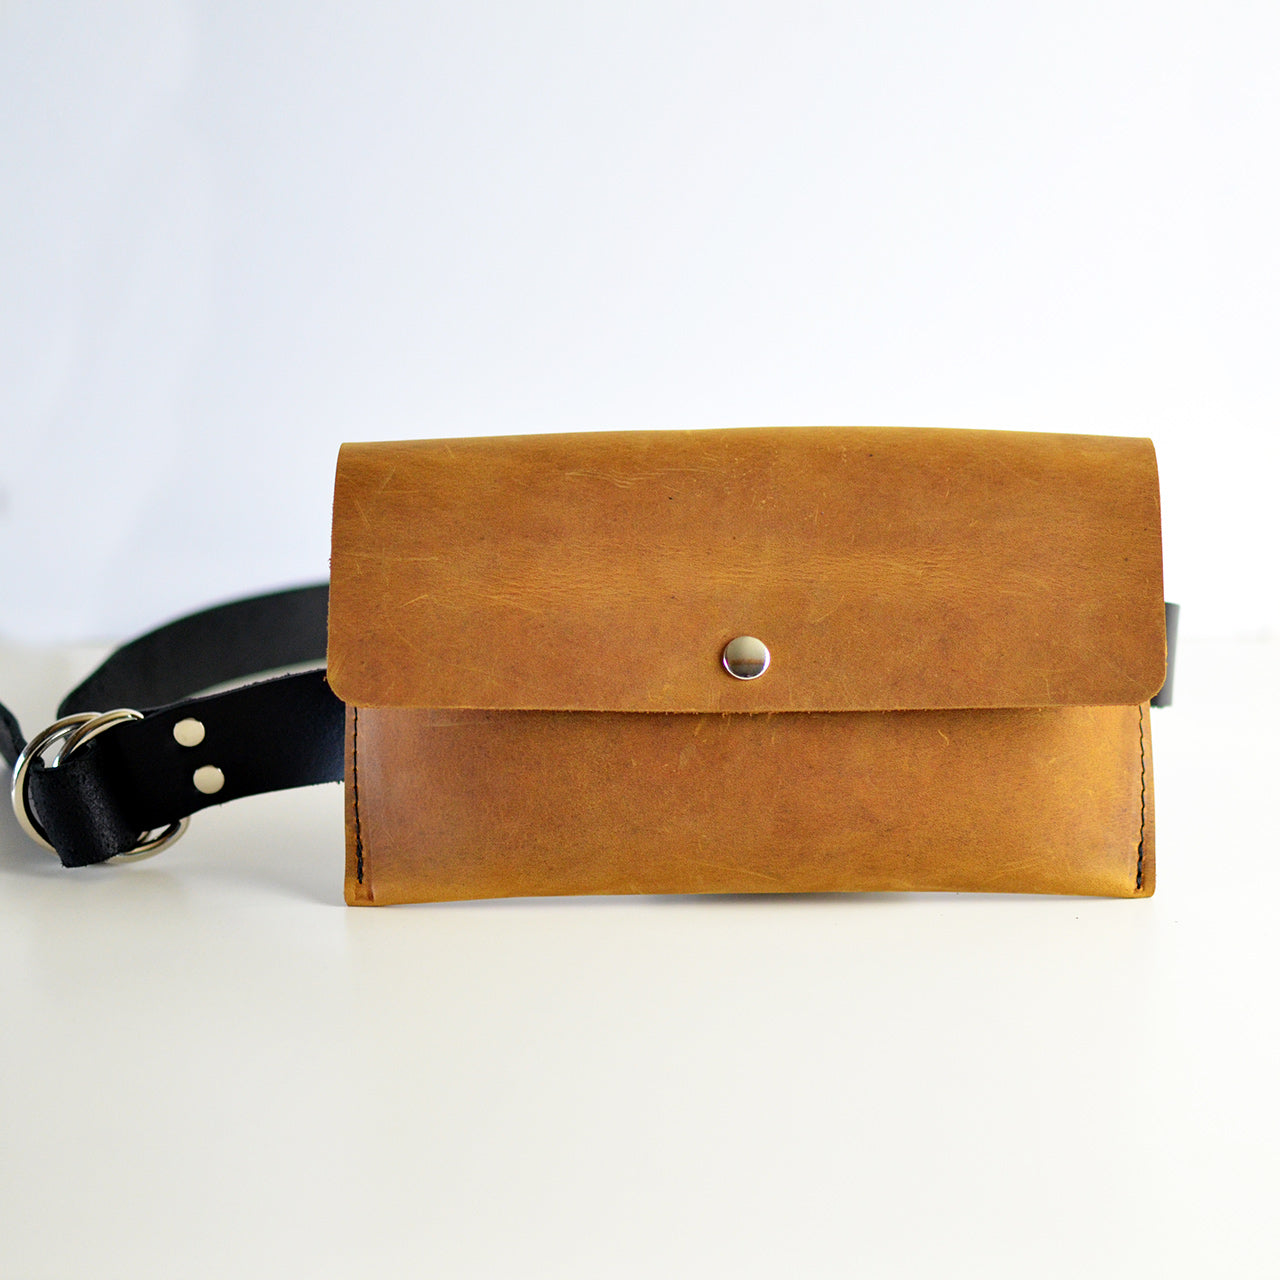 LIMITED EDITION Hipster Fanny Pack - Distressed leather